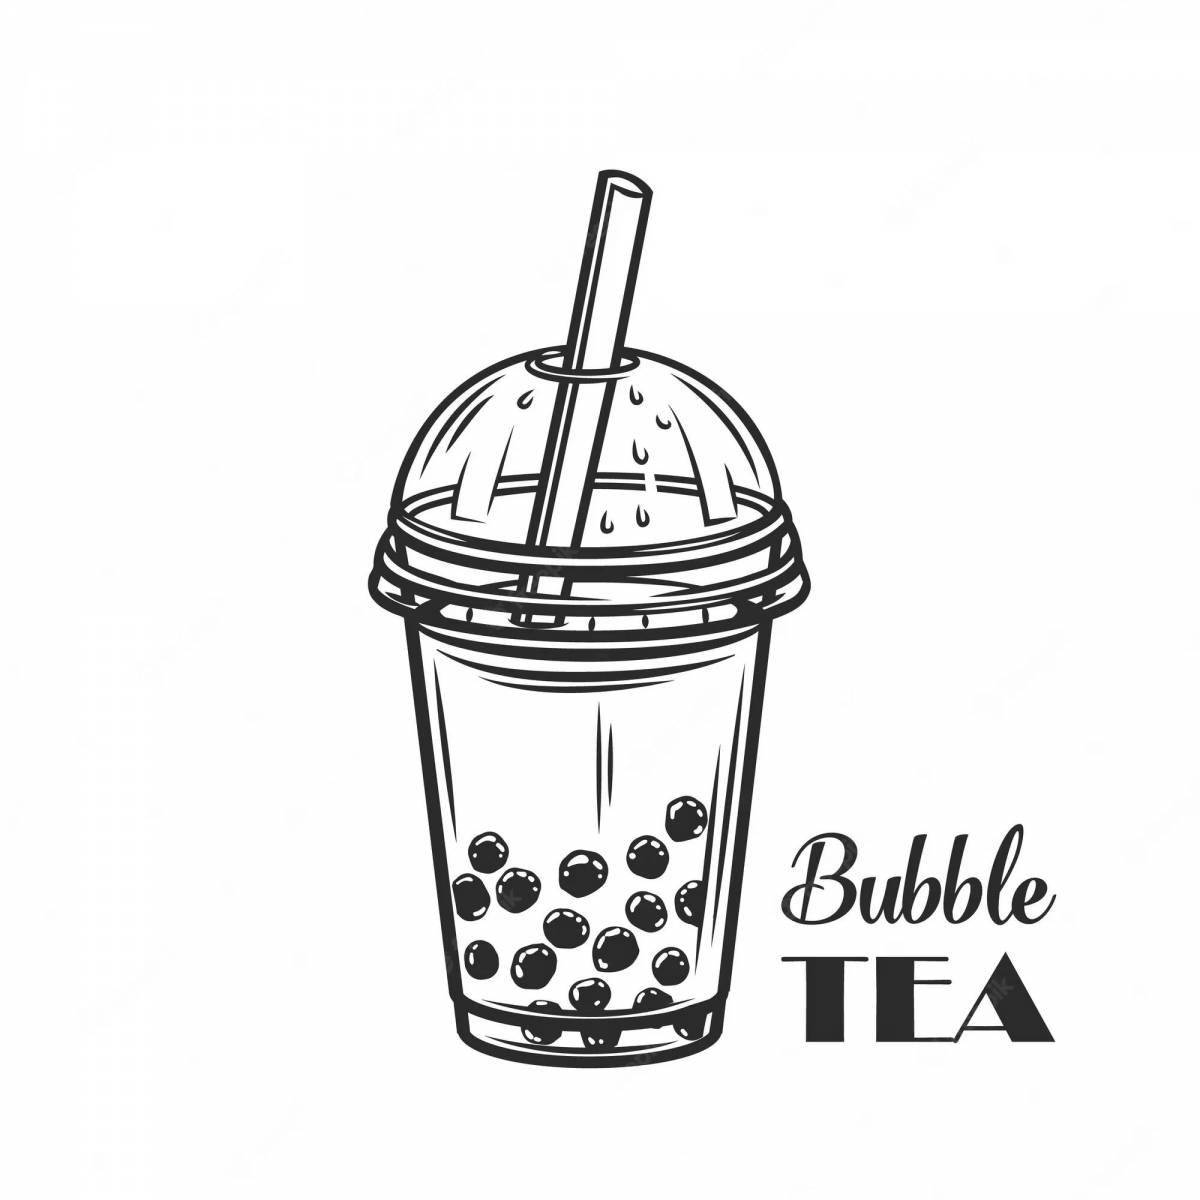 Fascinating bubble tea coloring page